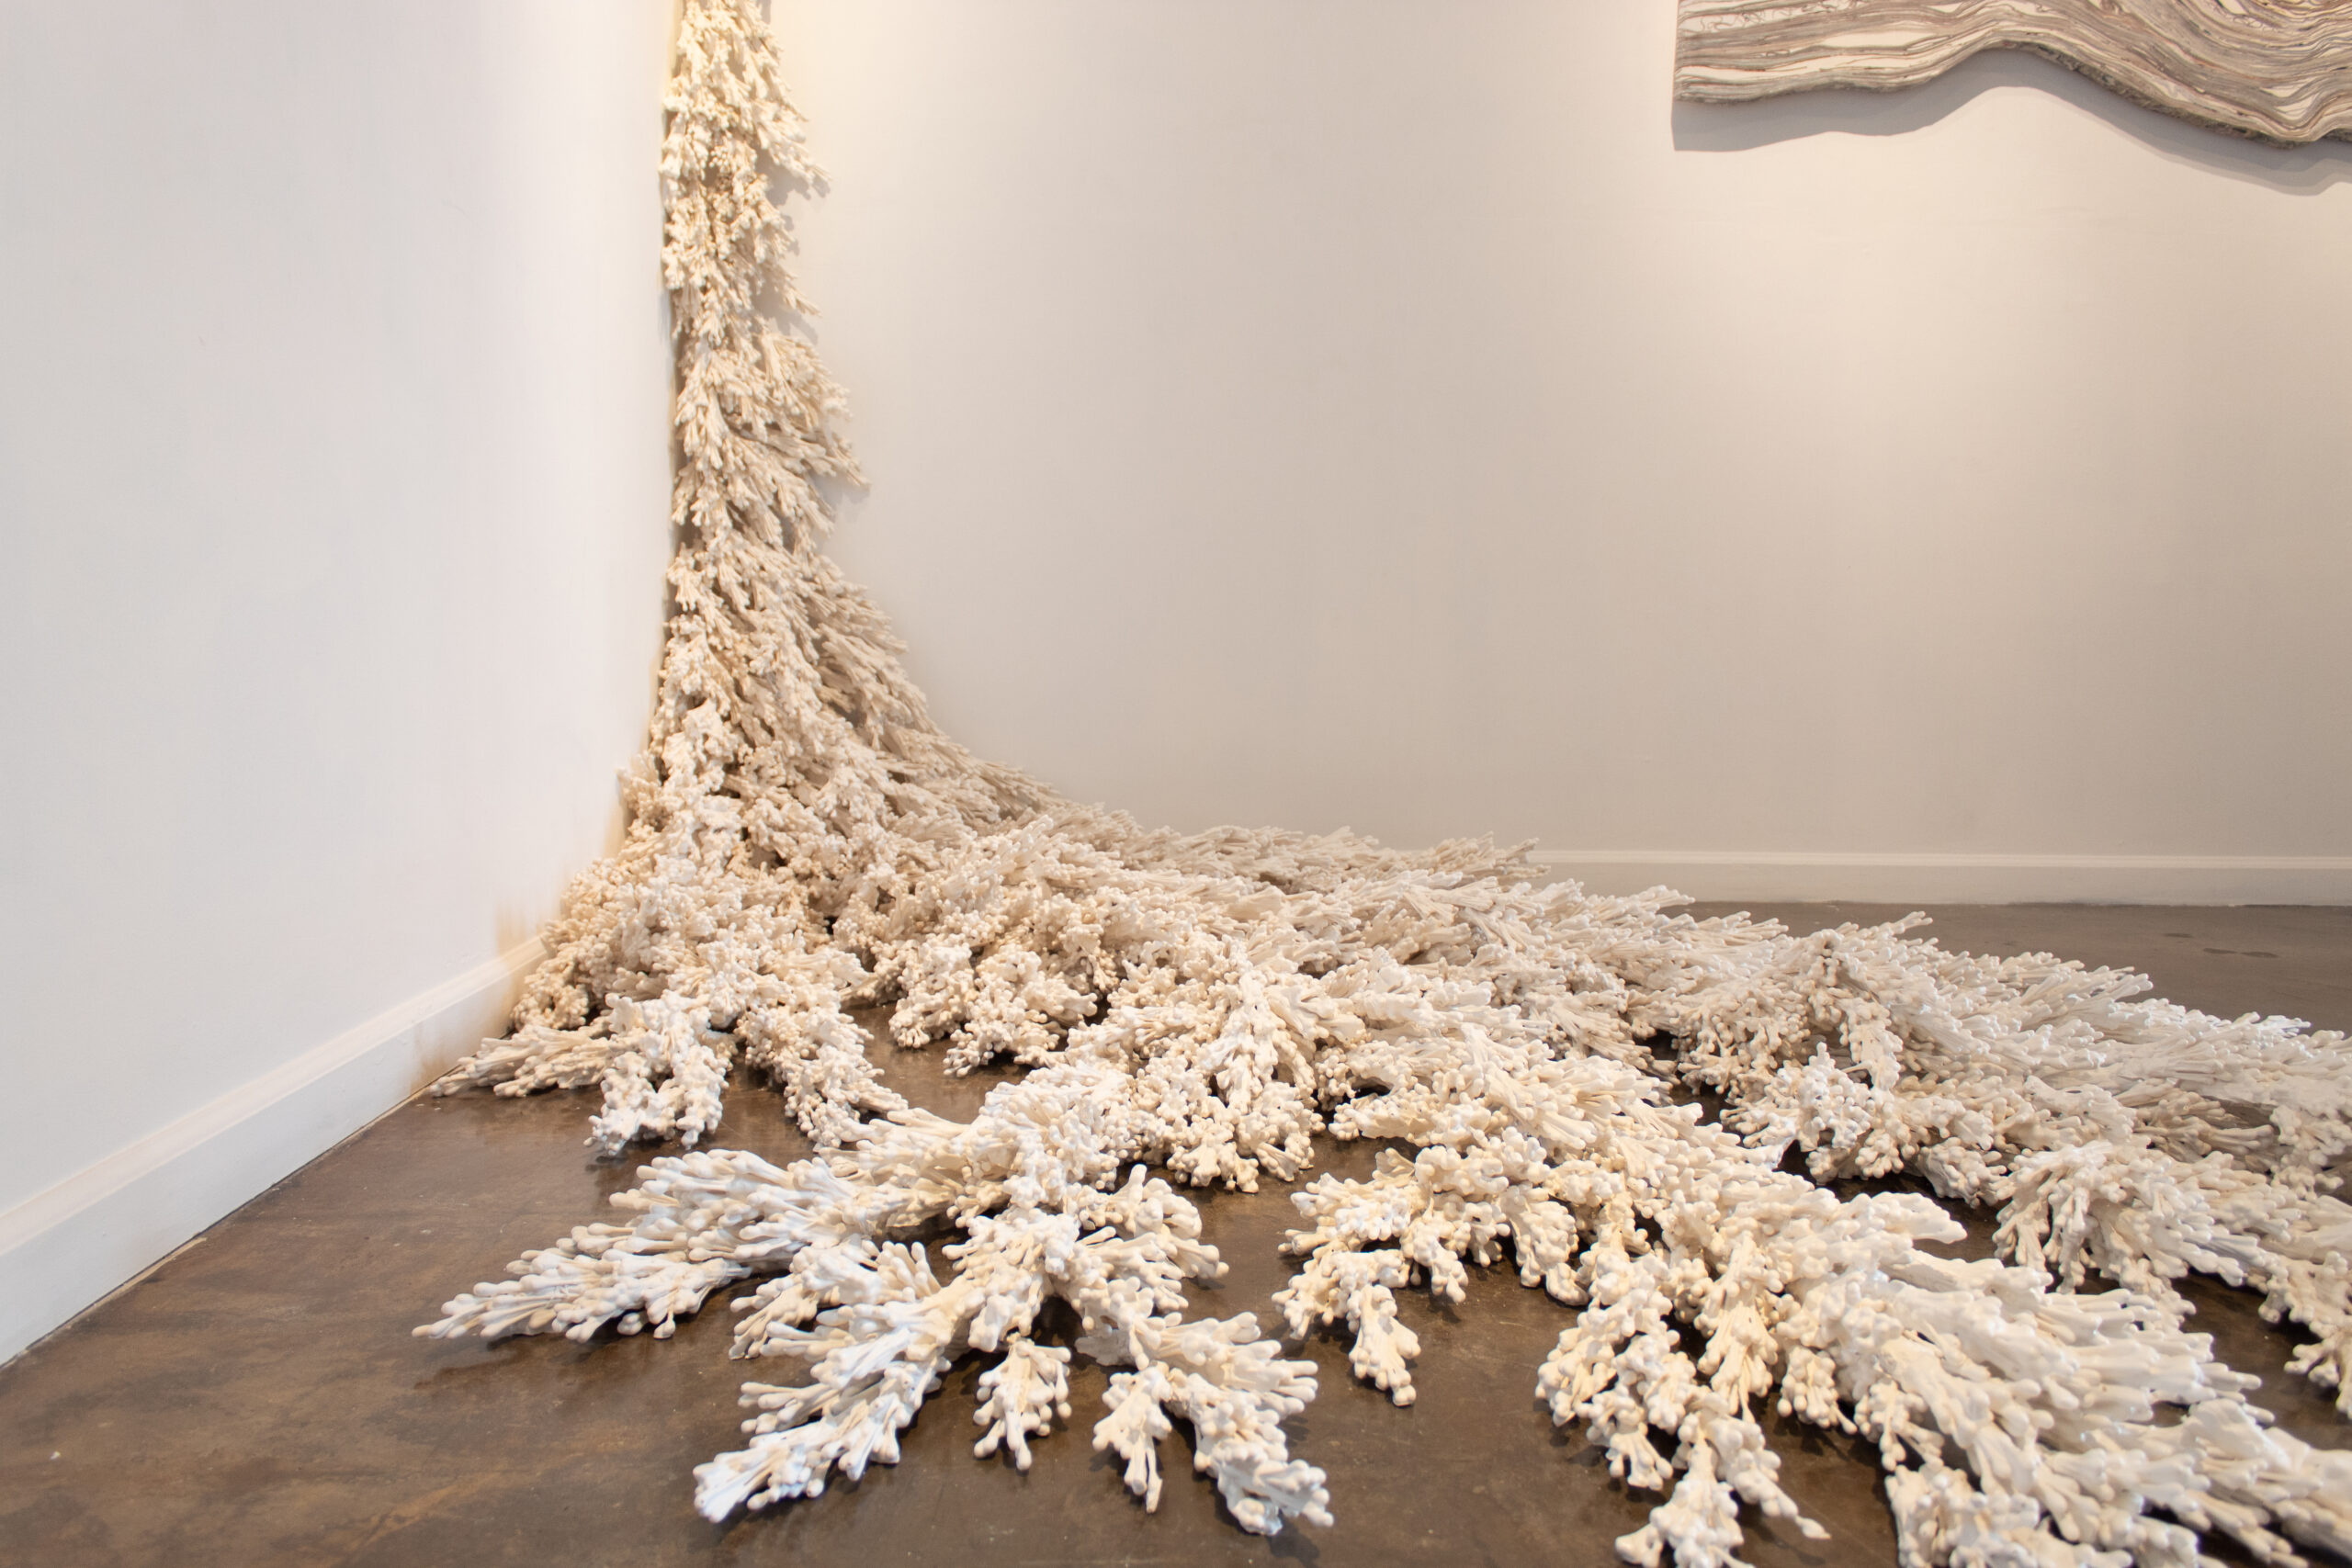 Textural Sculptures by Artist Jessica Drenk Use Junk Mail, Book Pages, and Q-Tips to Explore Materiality | 国外美陈 美陈网站 美陈前沿 